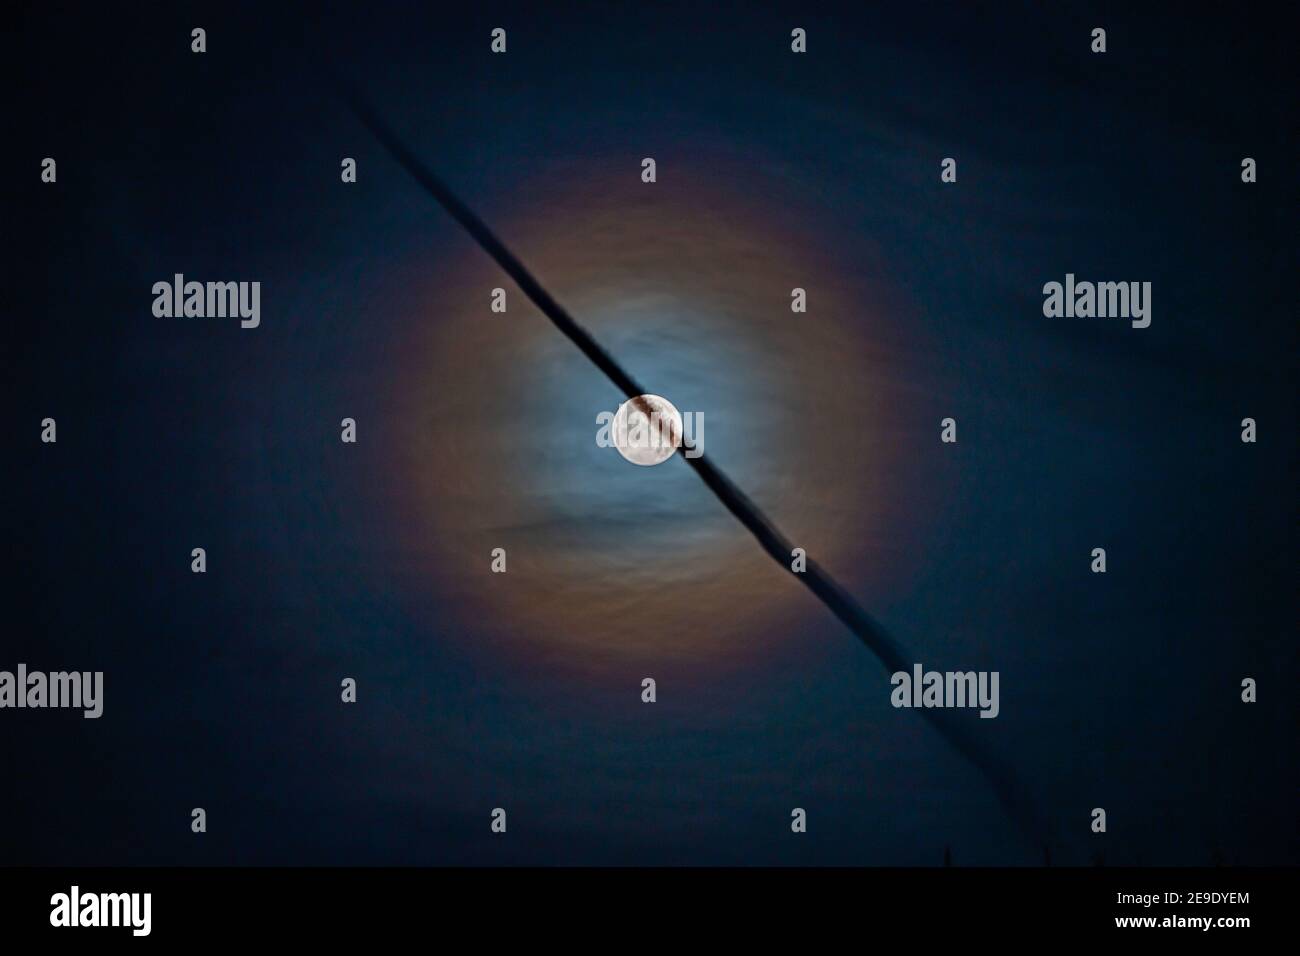 Lunar corona with jet vapour trail crossing in front Stock Photo